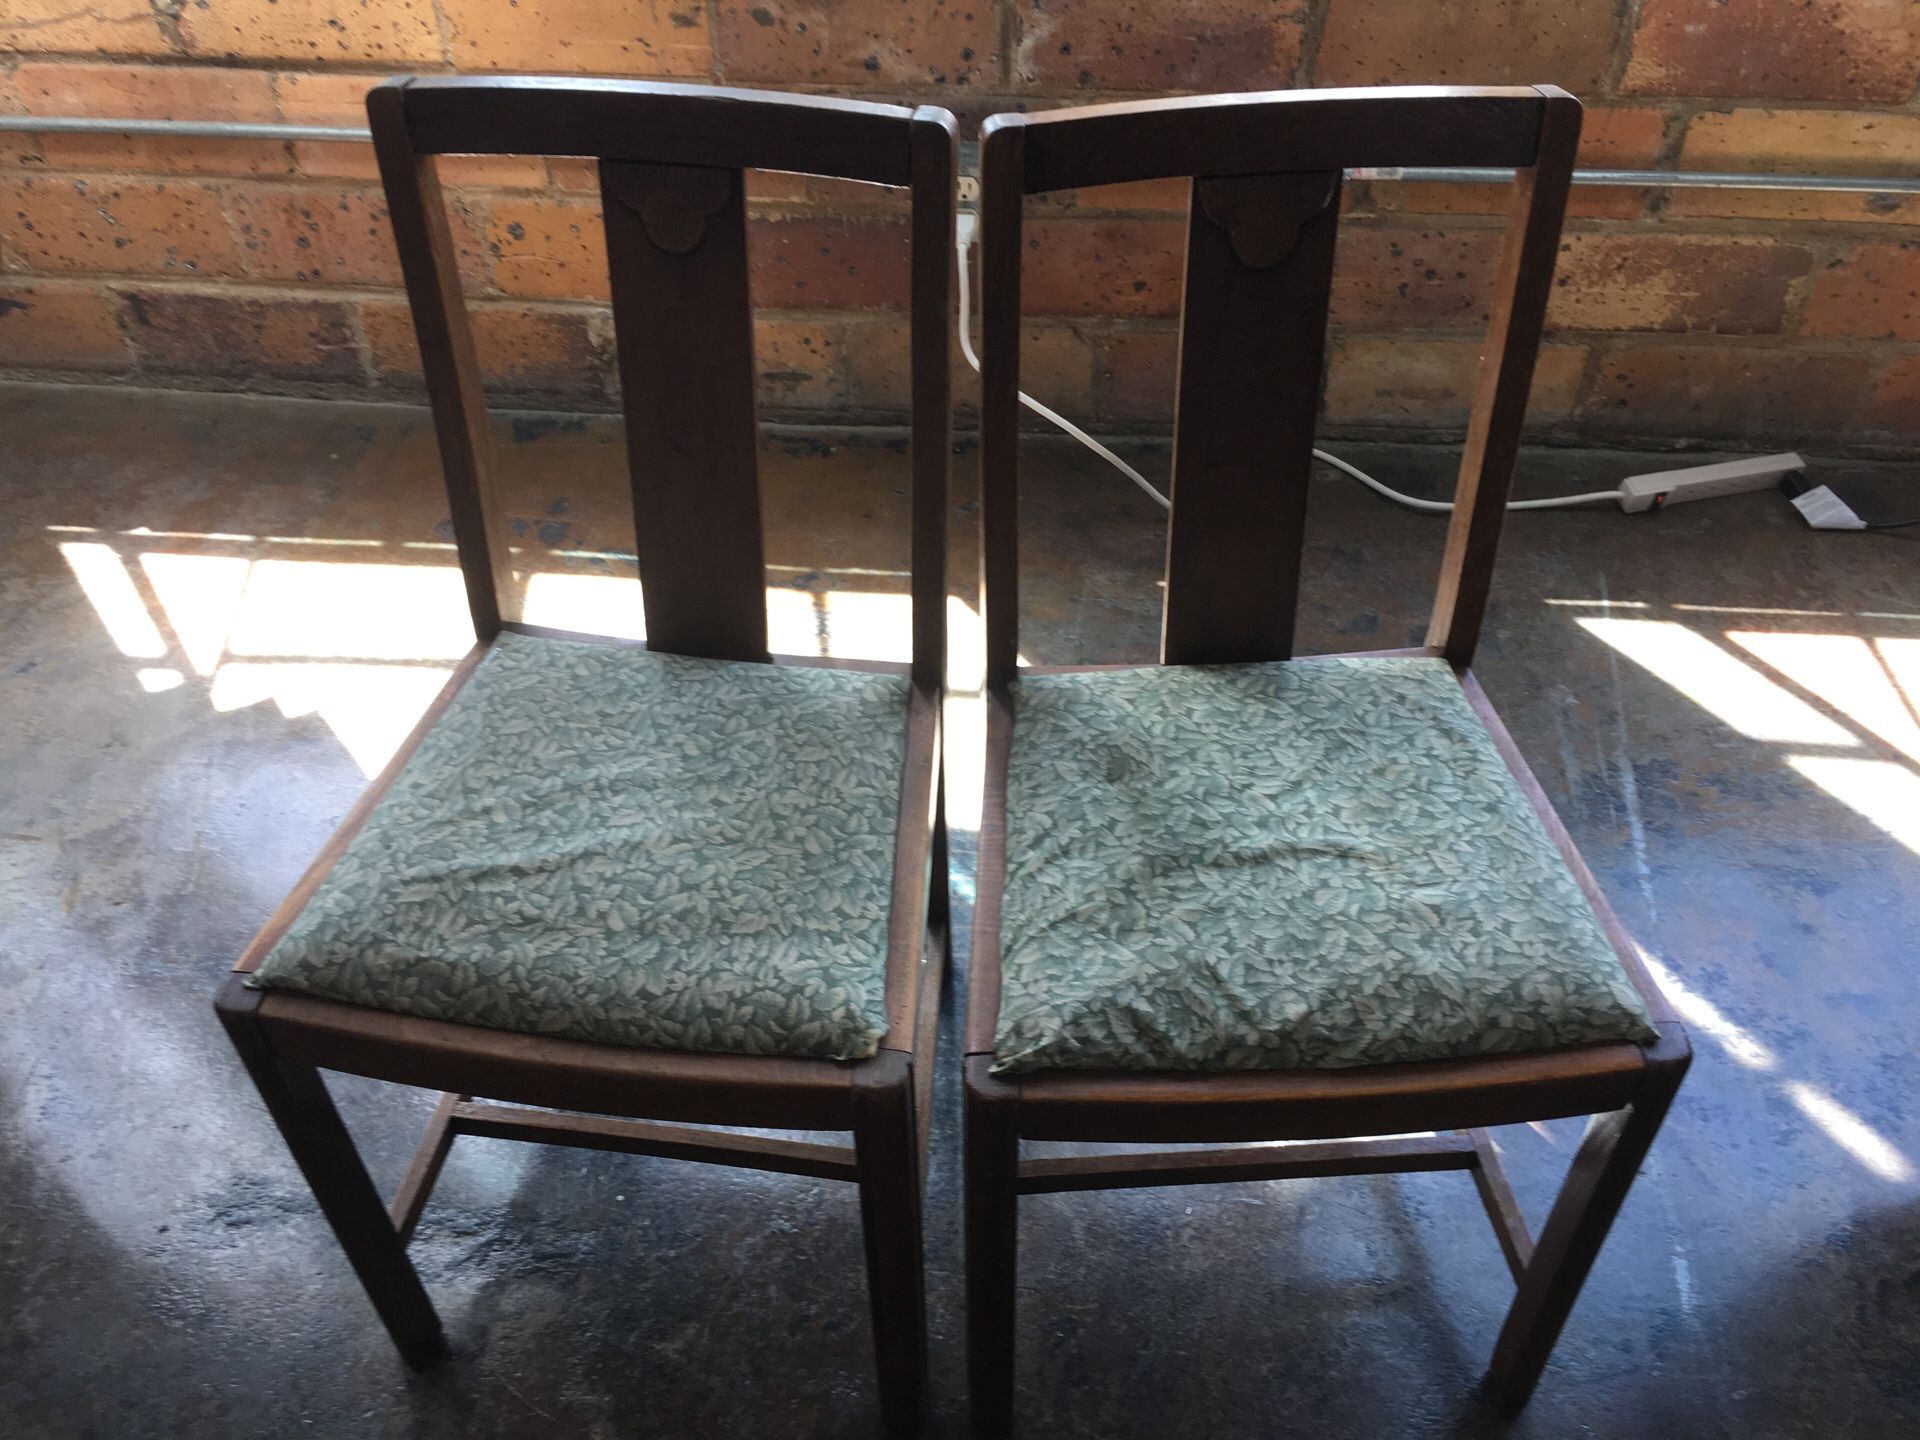 Antique side or dining chairs. Sold together.